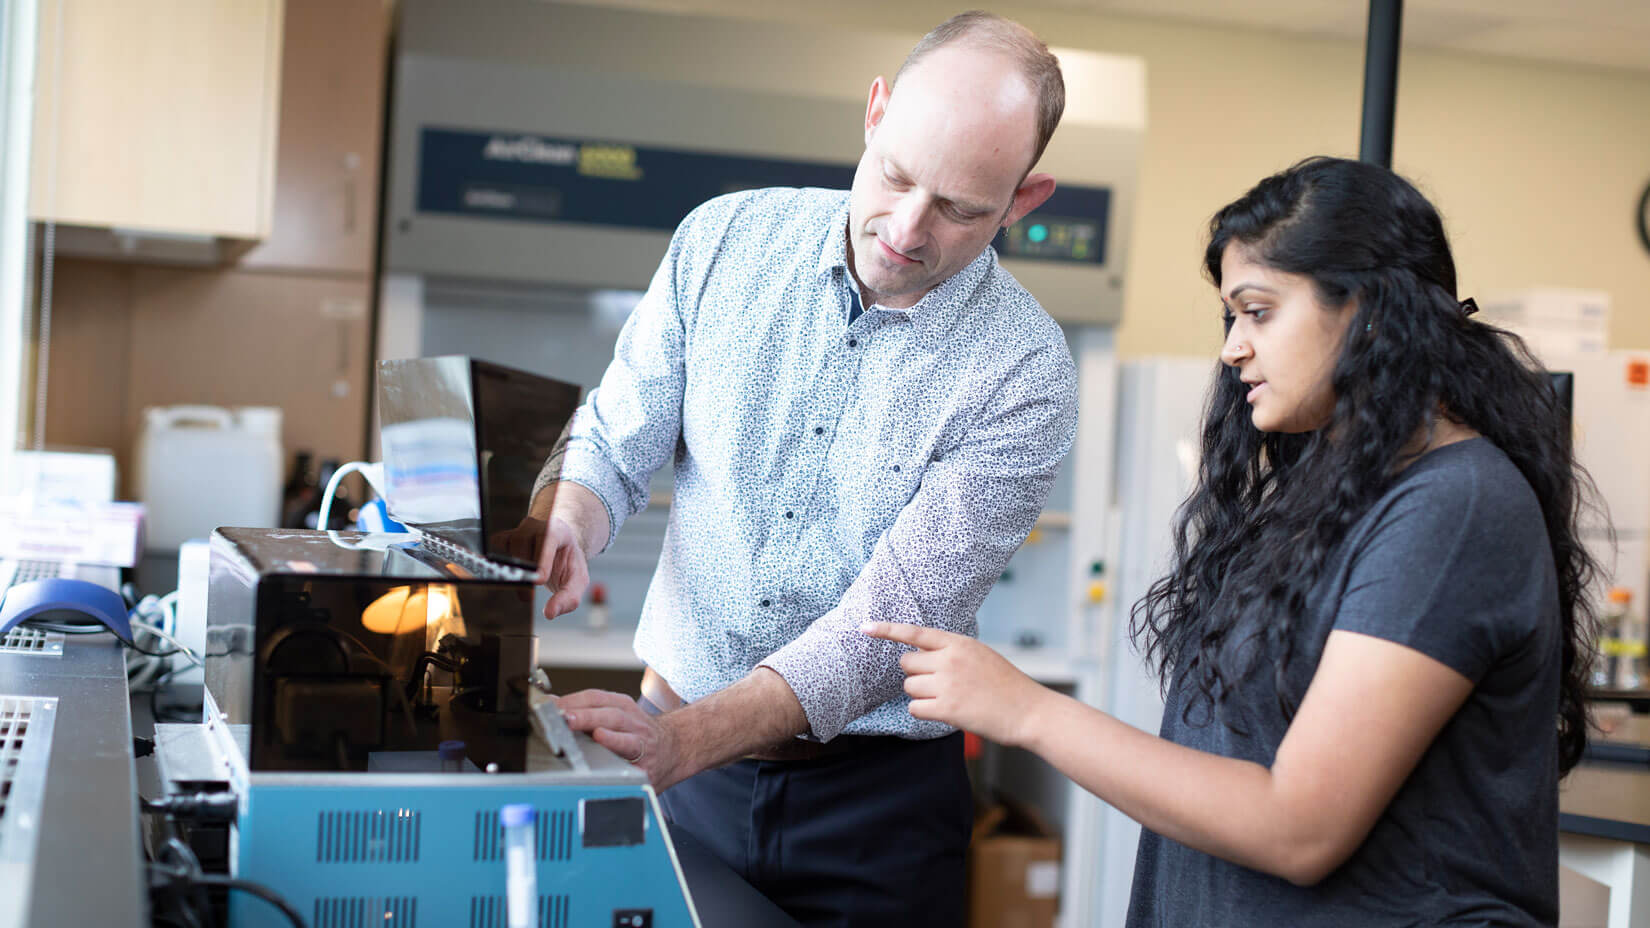 A biology professor guides a student to operate lab equipment.